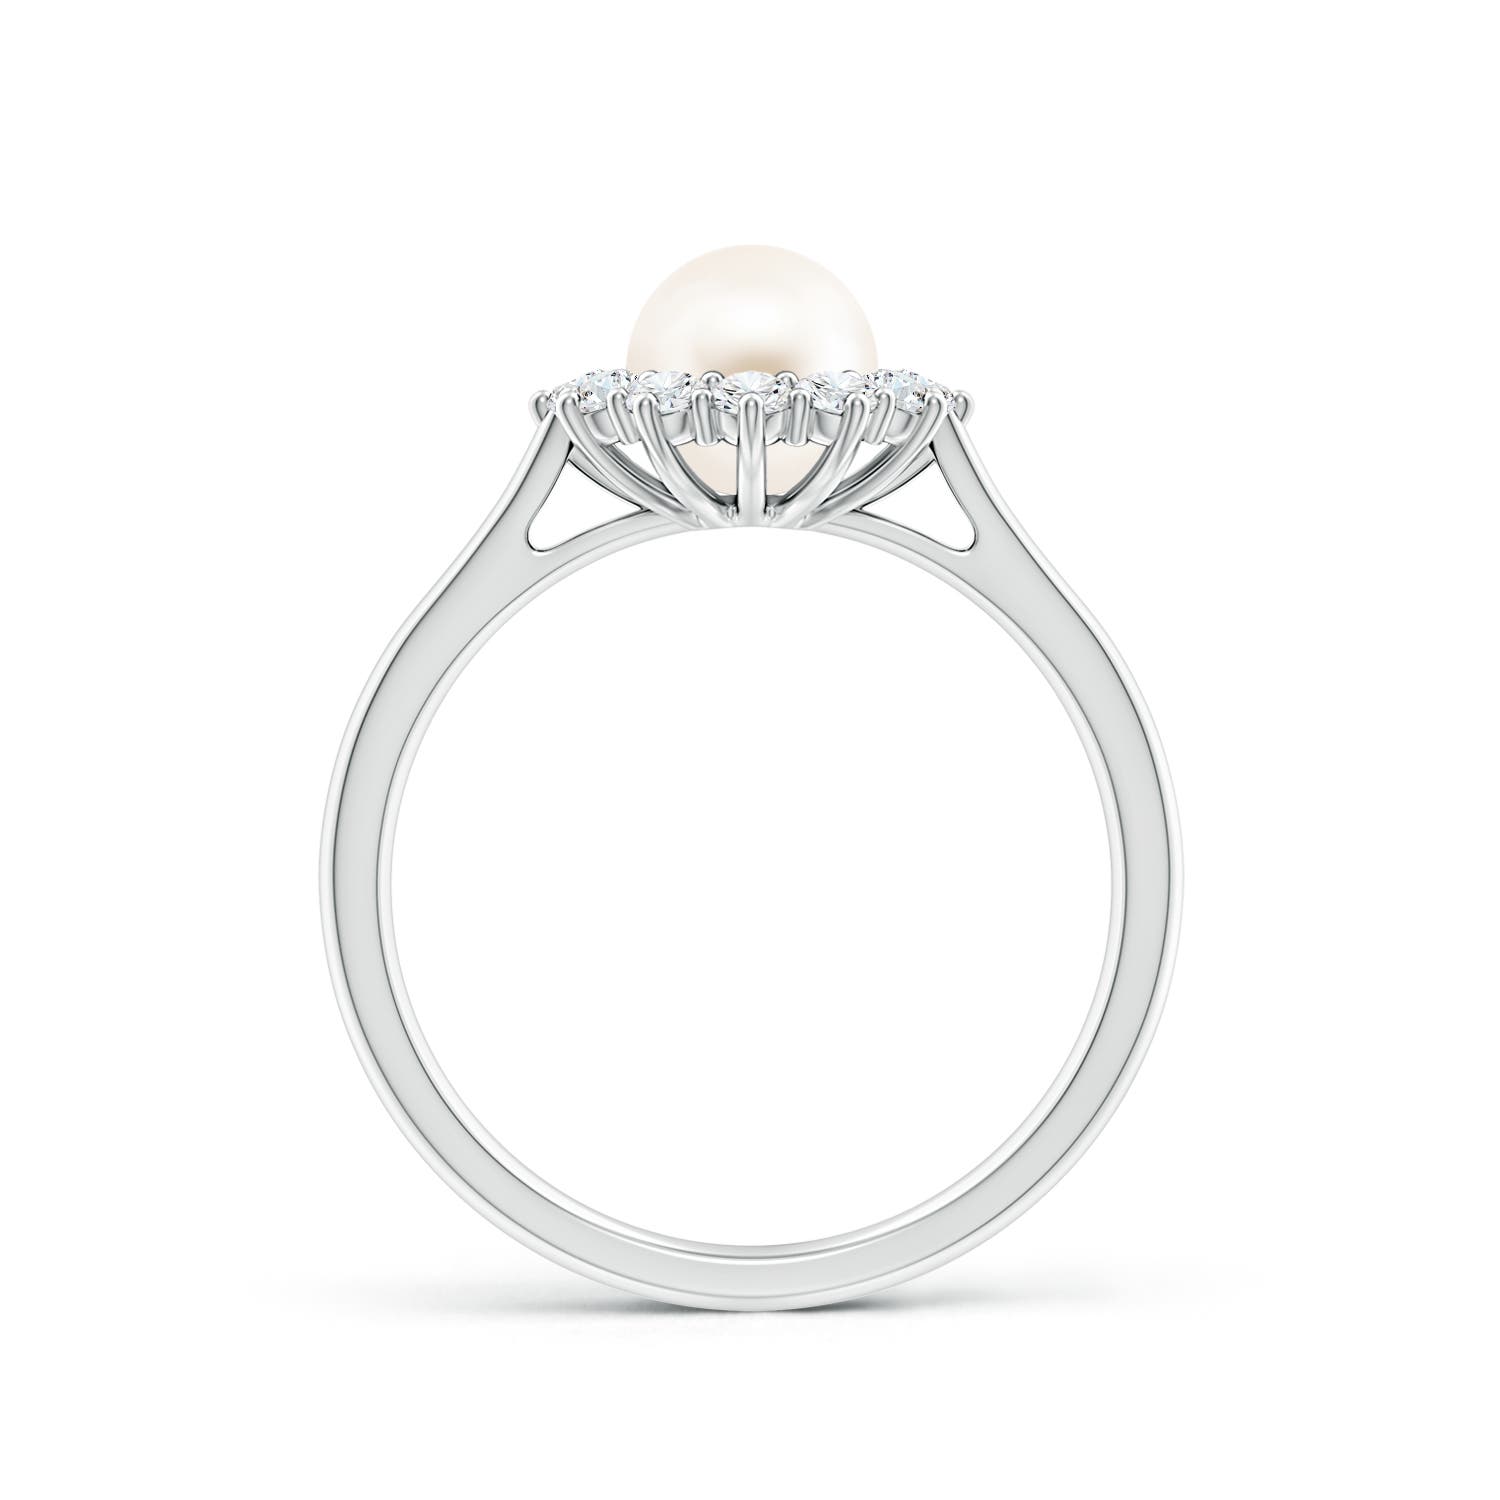 AAA / 1.88 CT / 14 KT White Gold